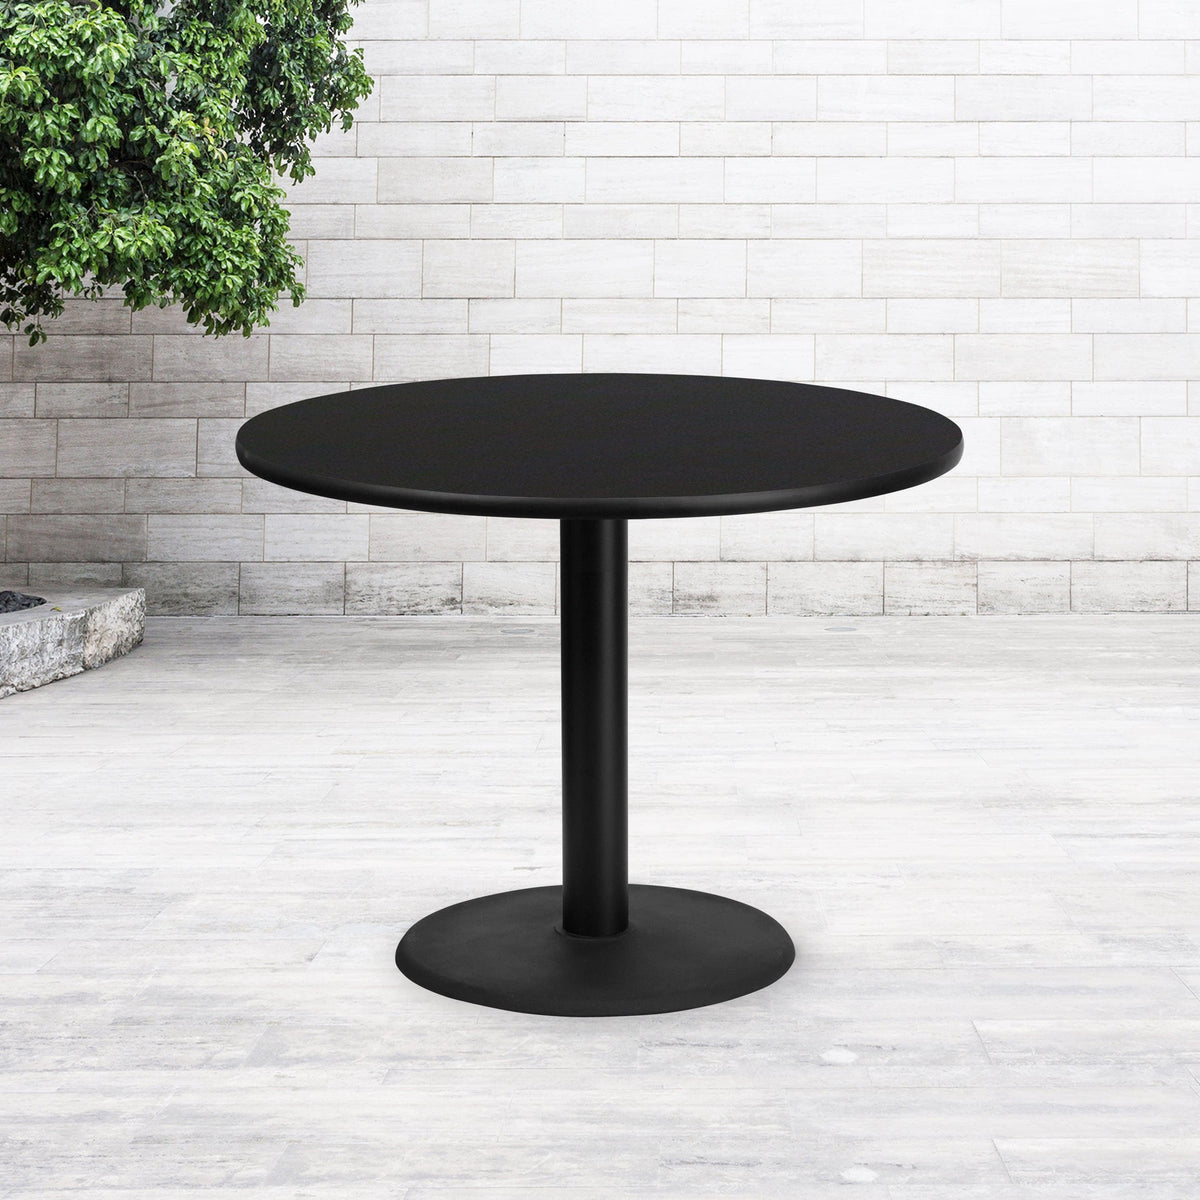 Black |#| 42inch Round Black Laminate Table Top with 24inch Round Table Height Base